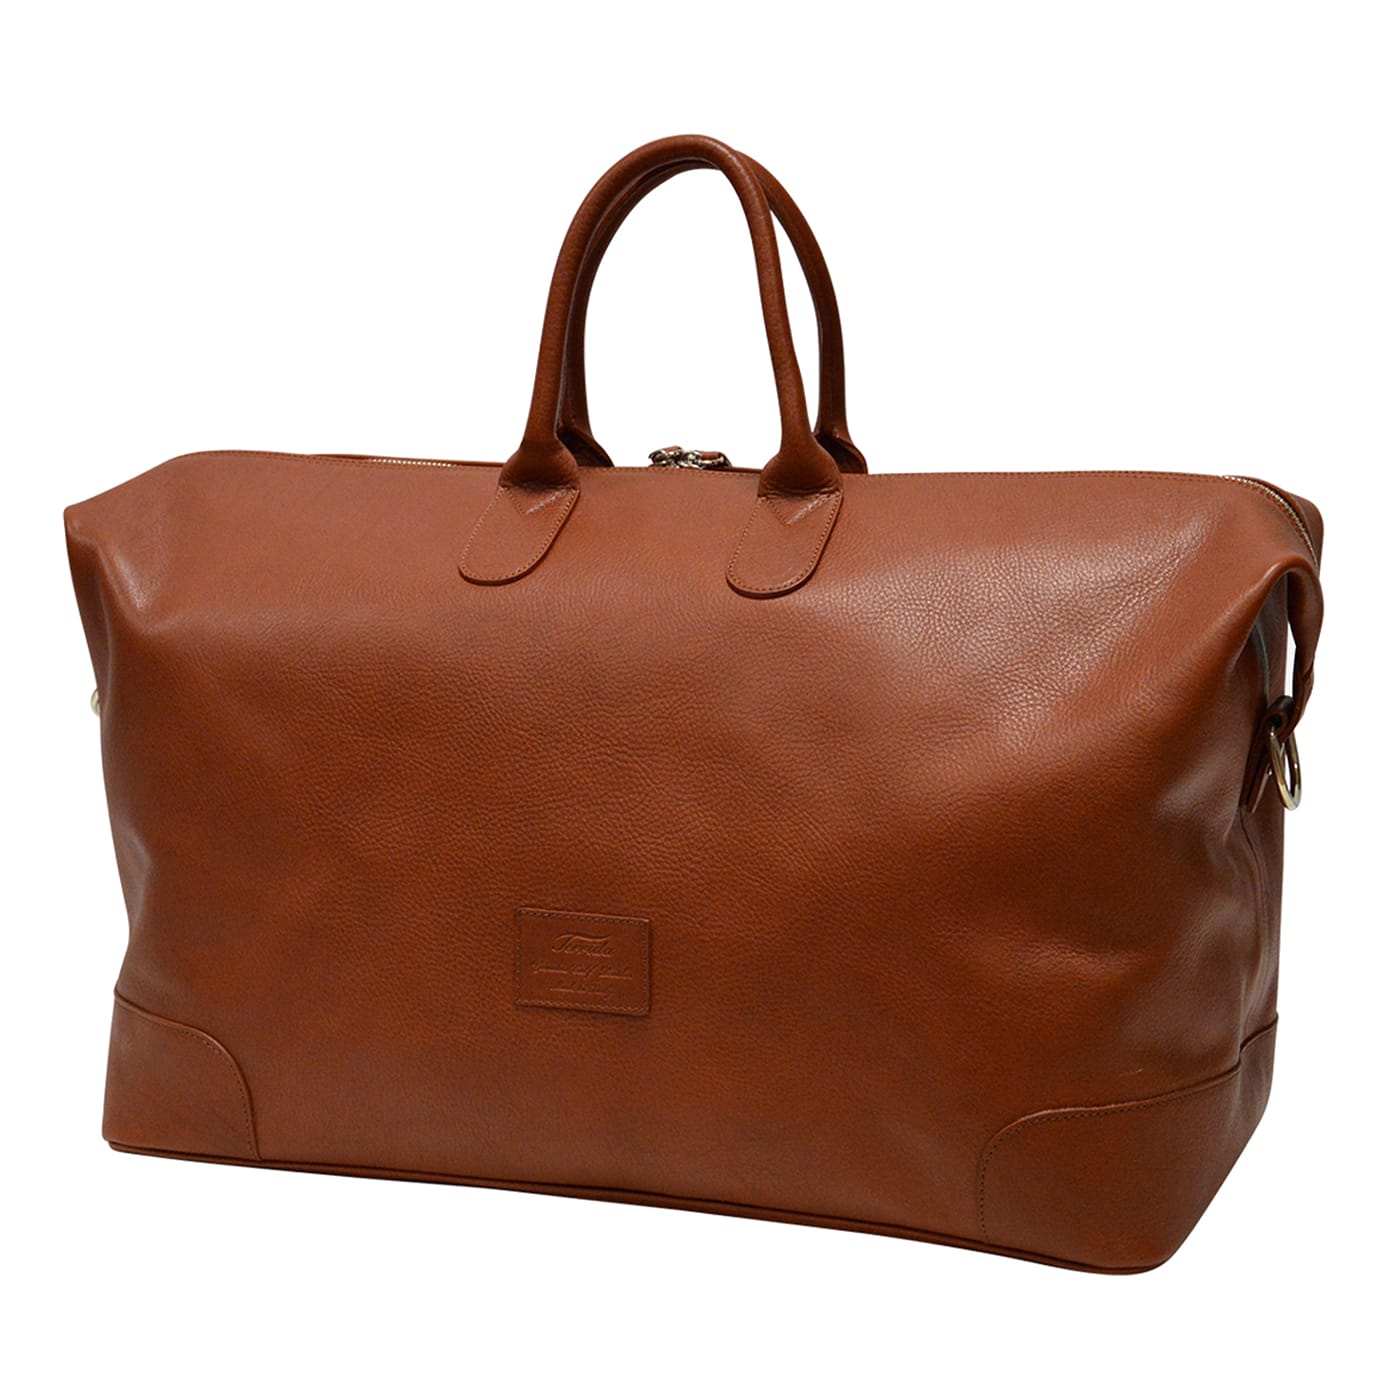 Antique Duffle Bag 038 Terrida - Handmade in Italy, real leather